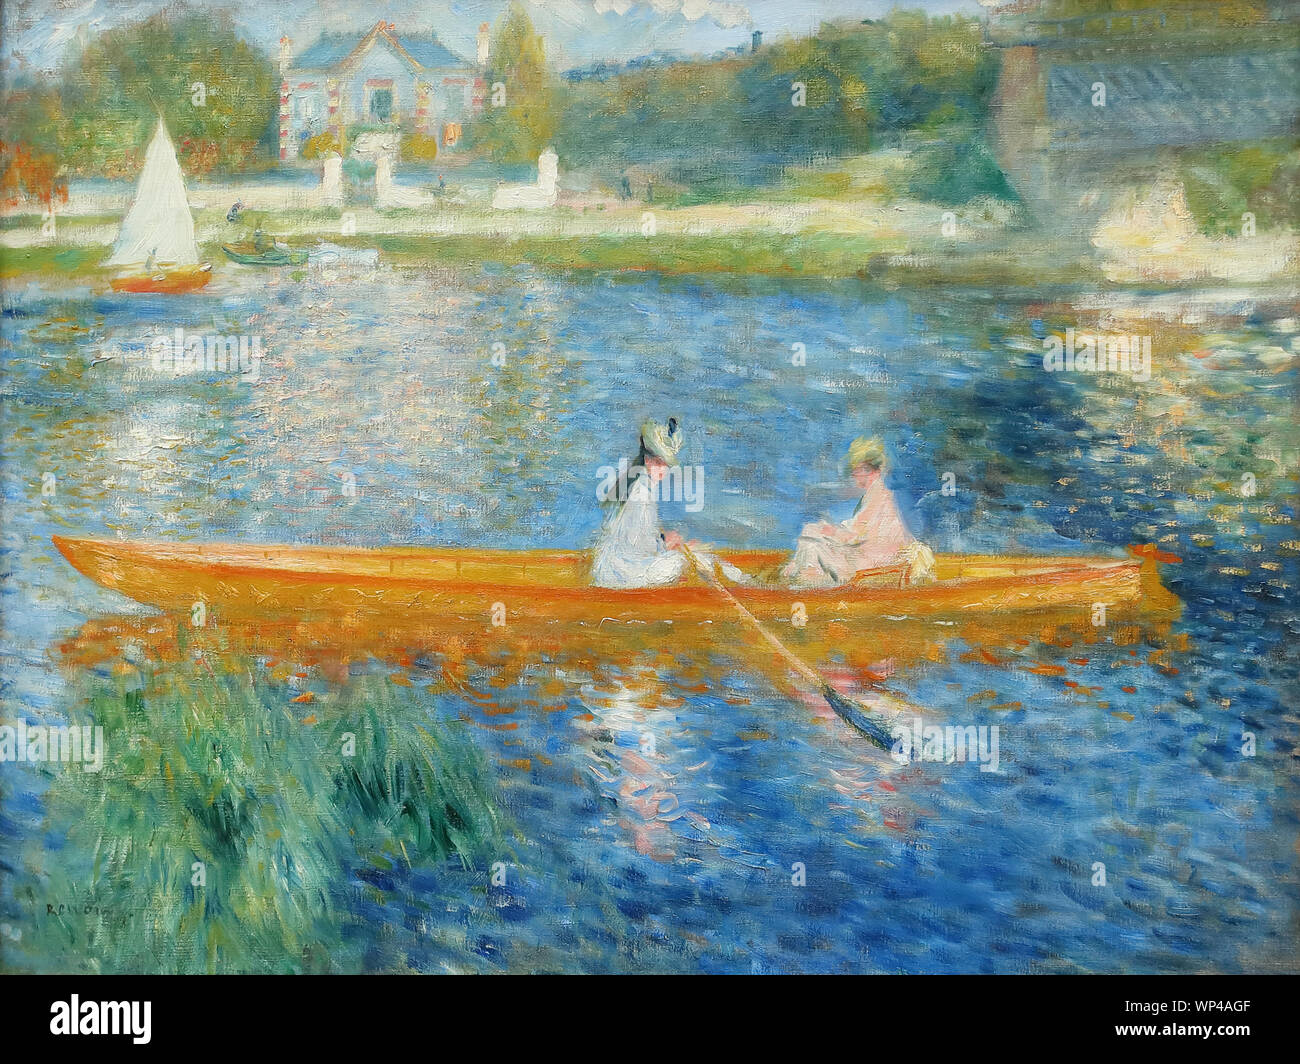 The Skiff (La Yole) by French Impressionist painter Pierre-Auguste Renoir at the National Gallery, London, UK Stock Photo